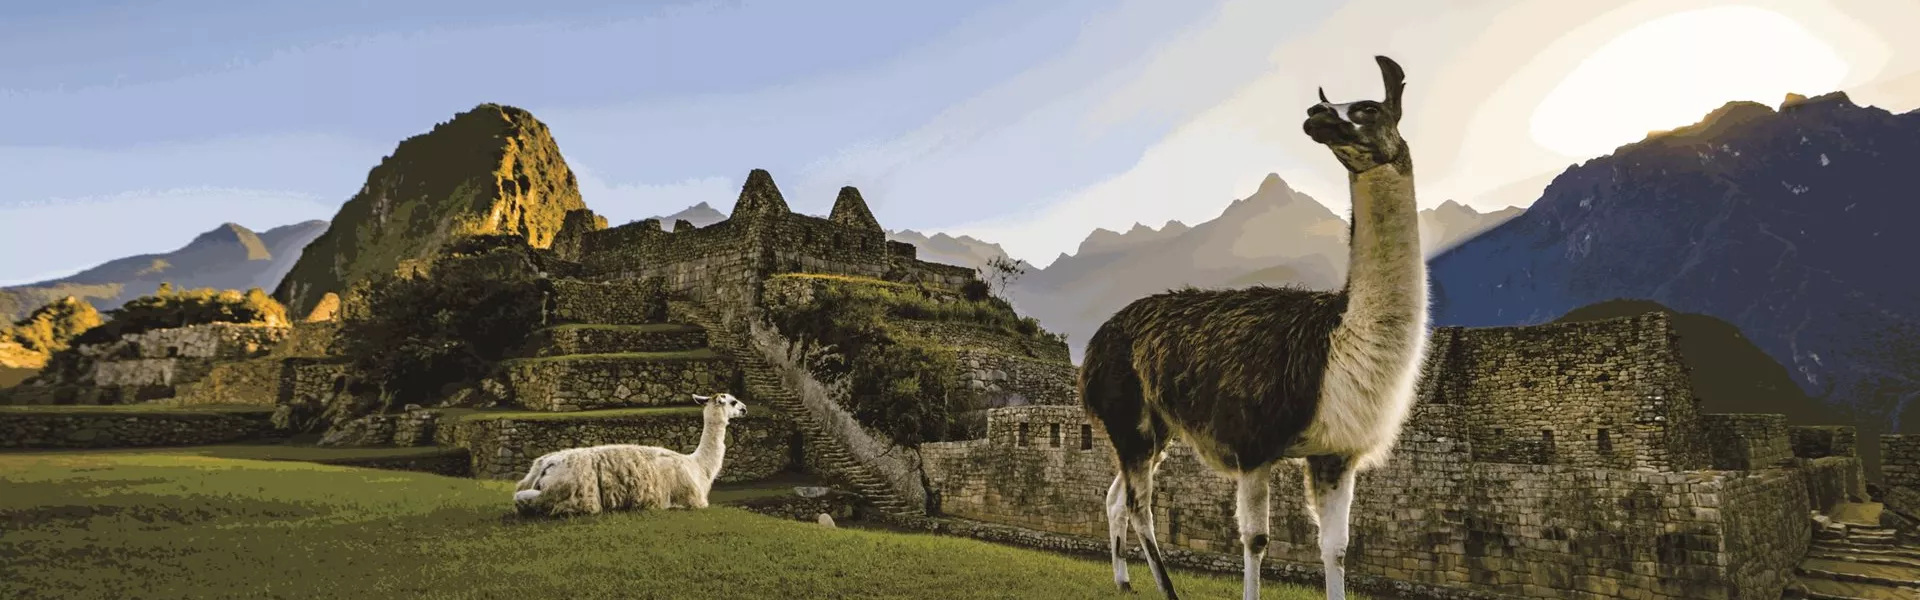 Two llamas standing on the grass in front of ancient buildings